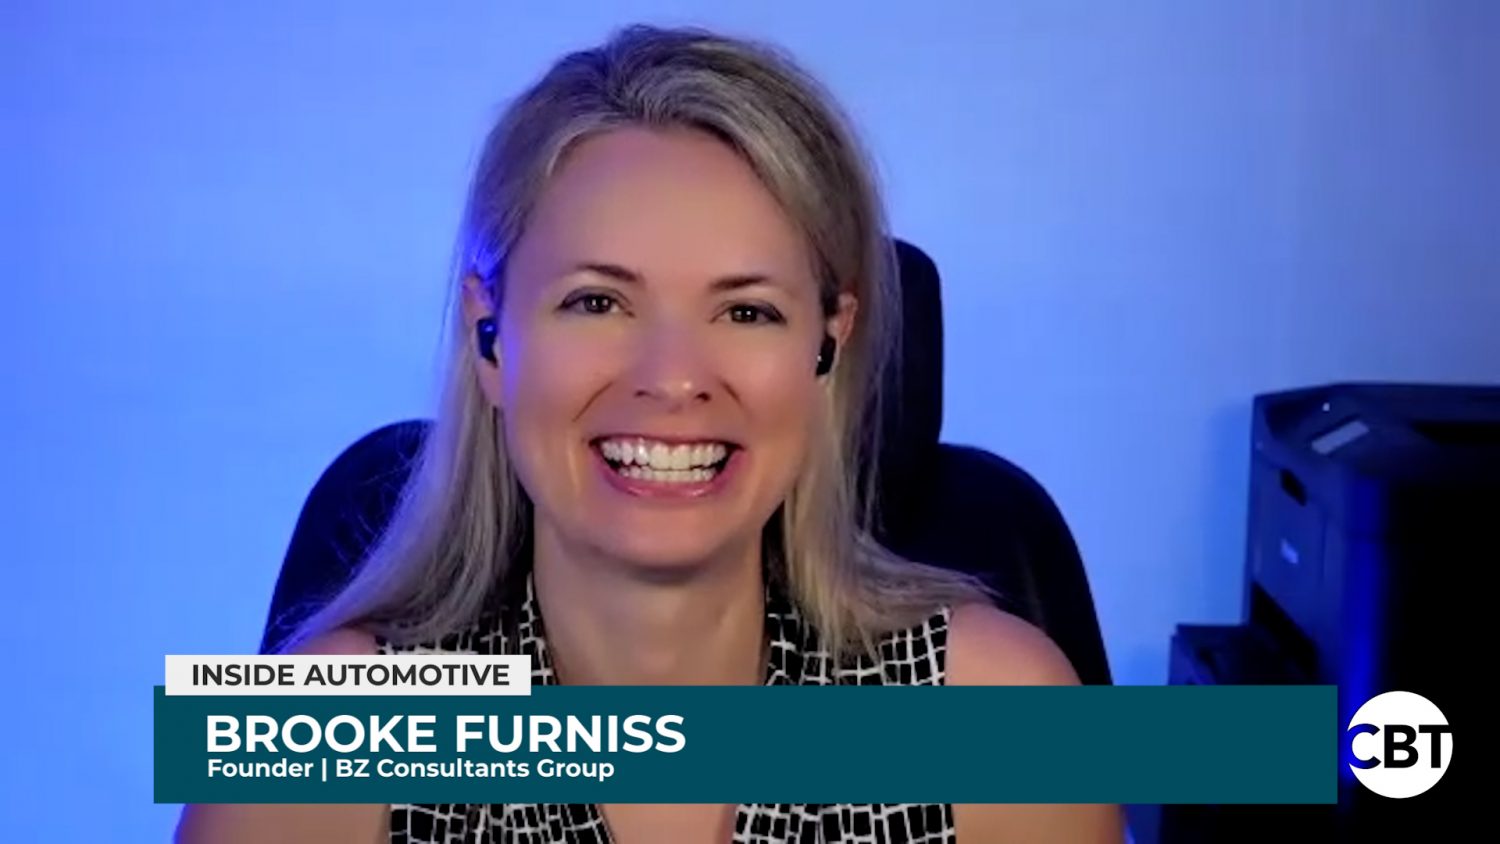 In this episode of Inside Automotive, we dive into valuable insights on optimizing customer and employee experiences with Brooke Furniss.